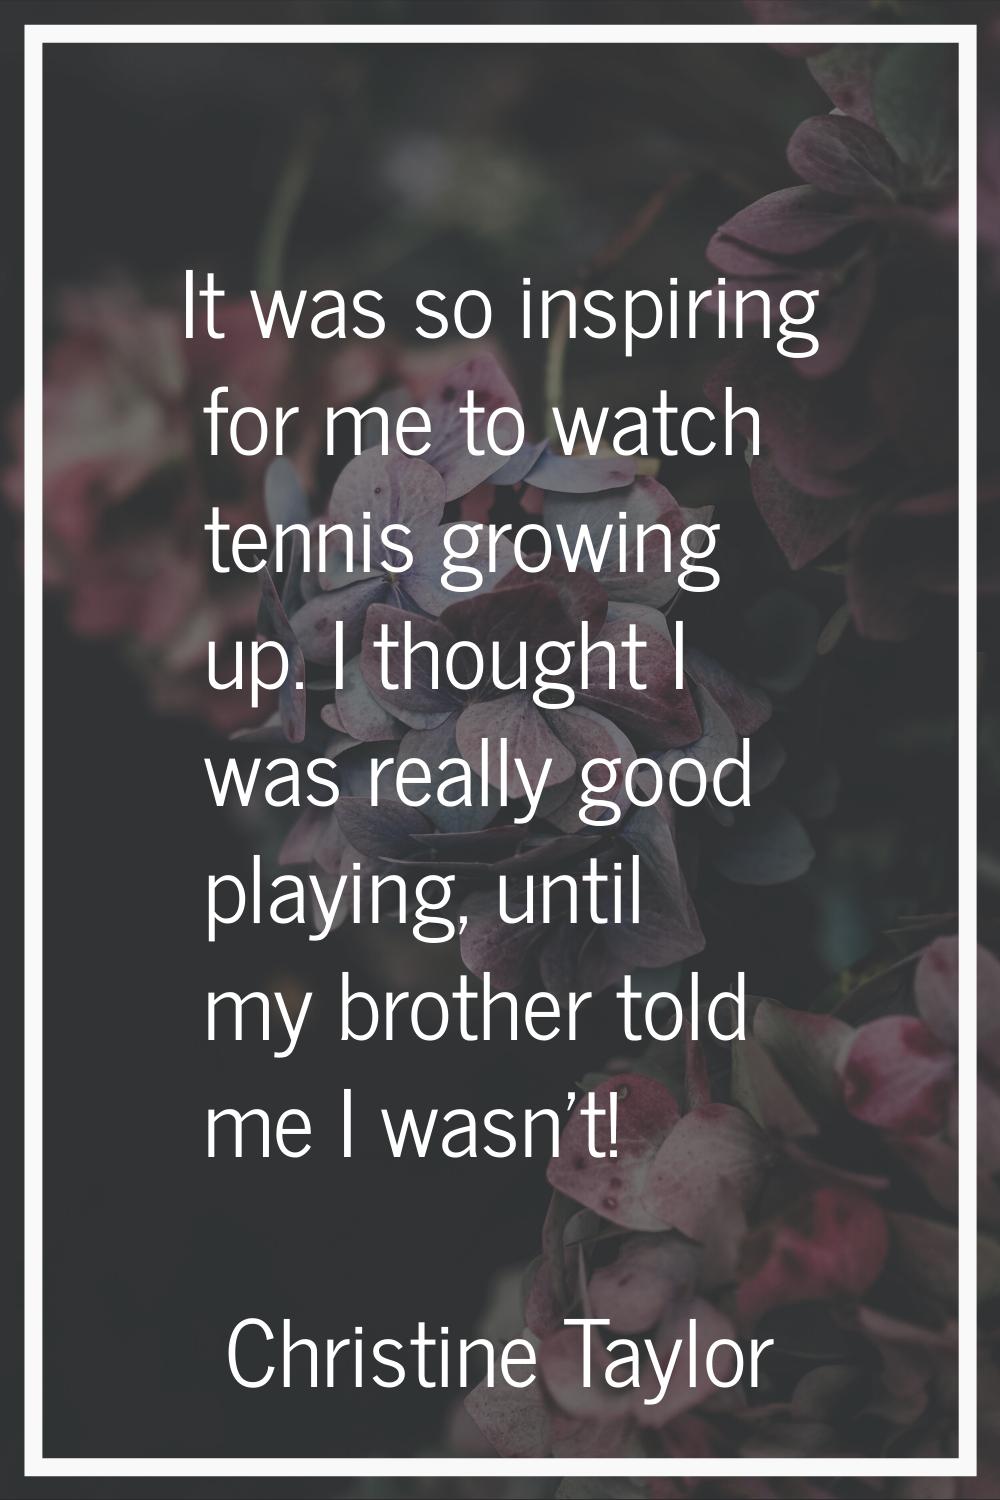 It was so inspiring for me to watch tennis growing up. I thought I was really good playing, until m